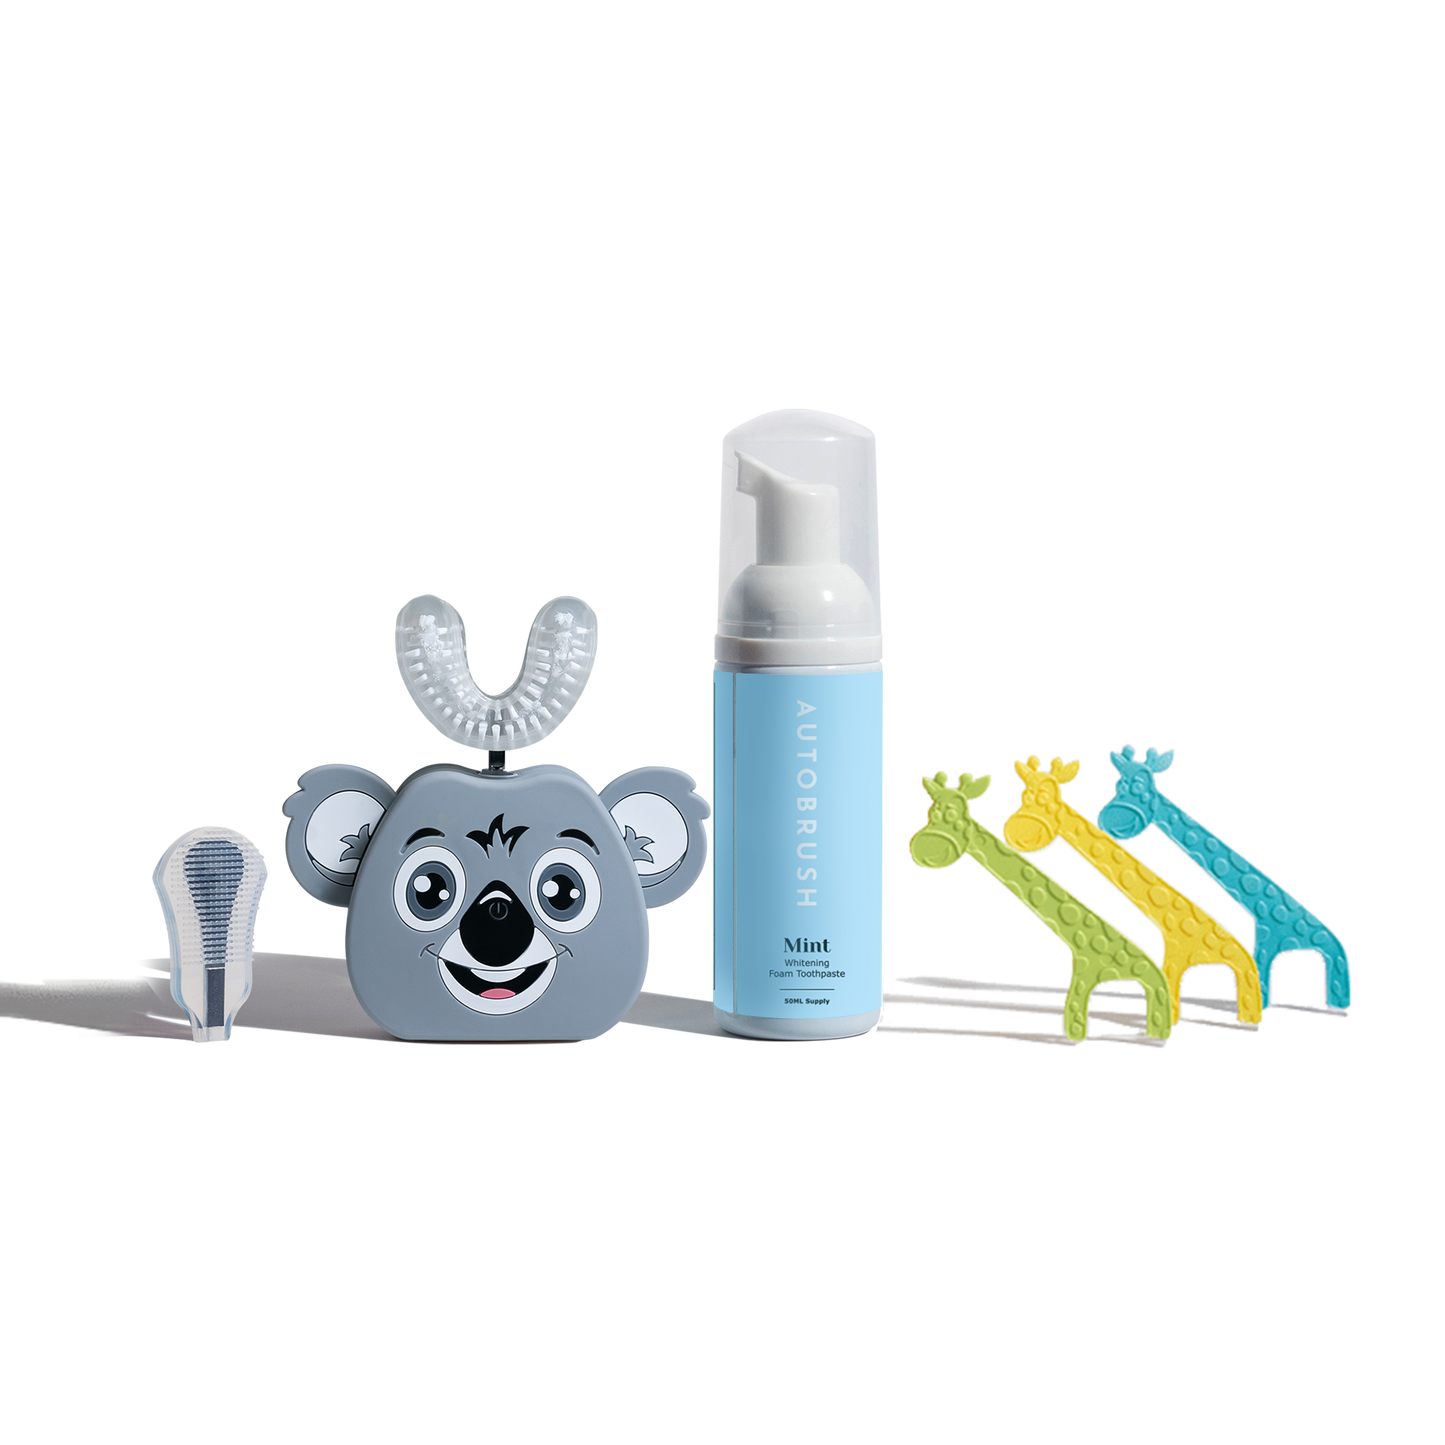 autobrush®: Sonic Kids Total Package Offer